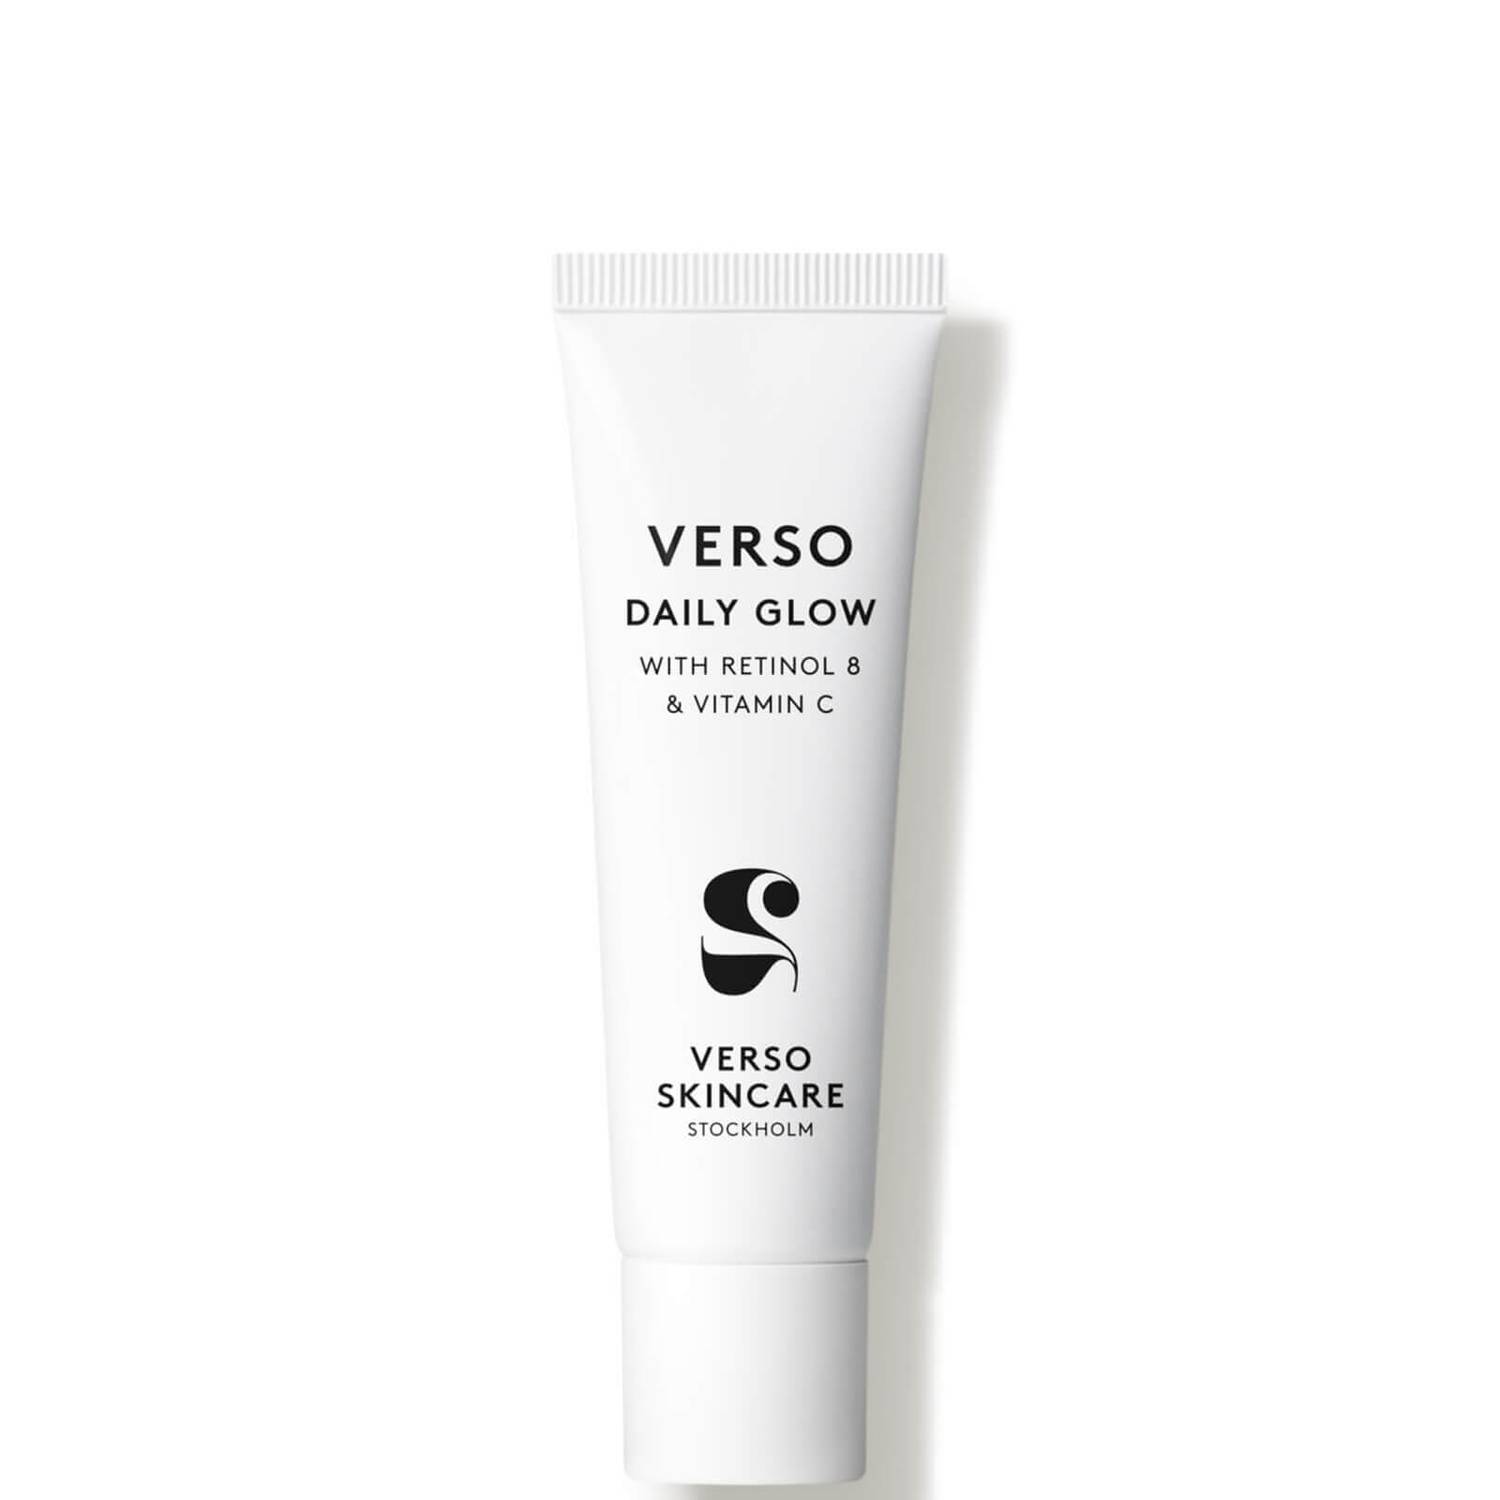 Verso Daily Glow